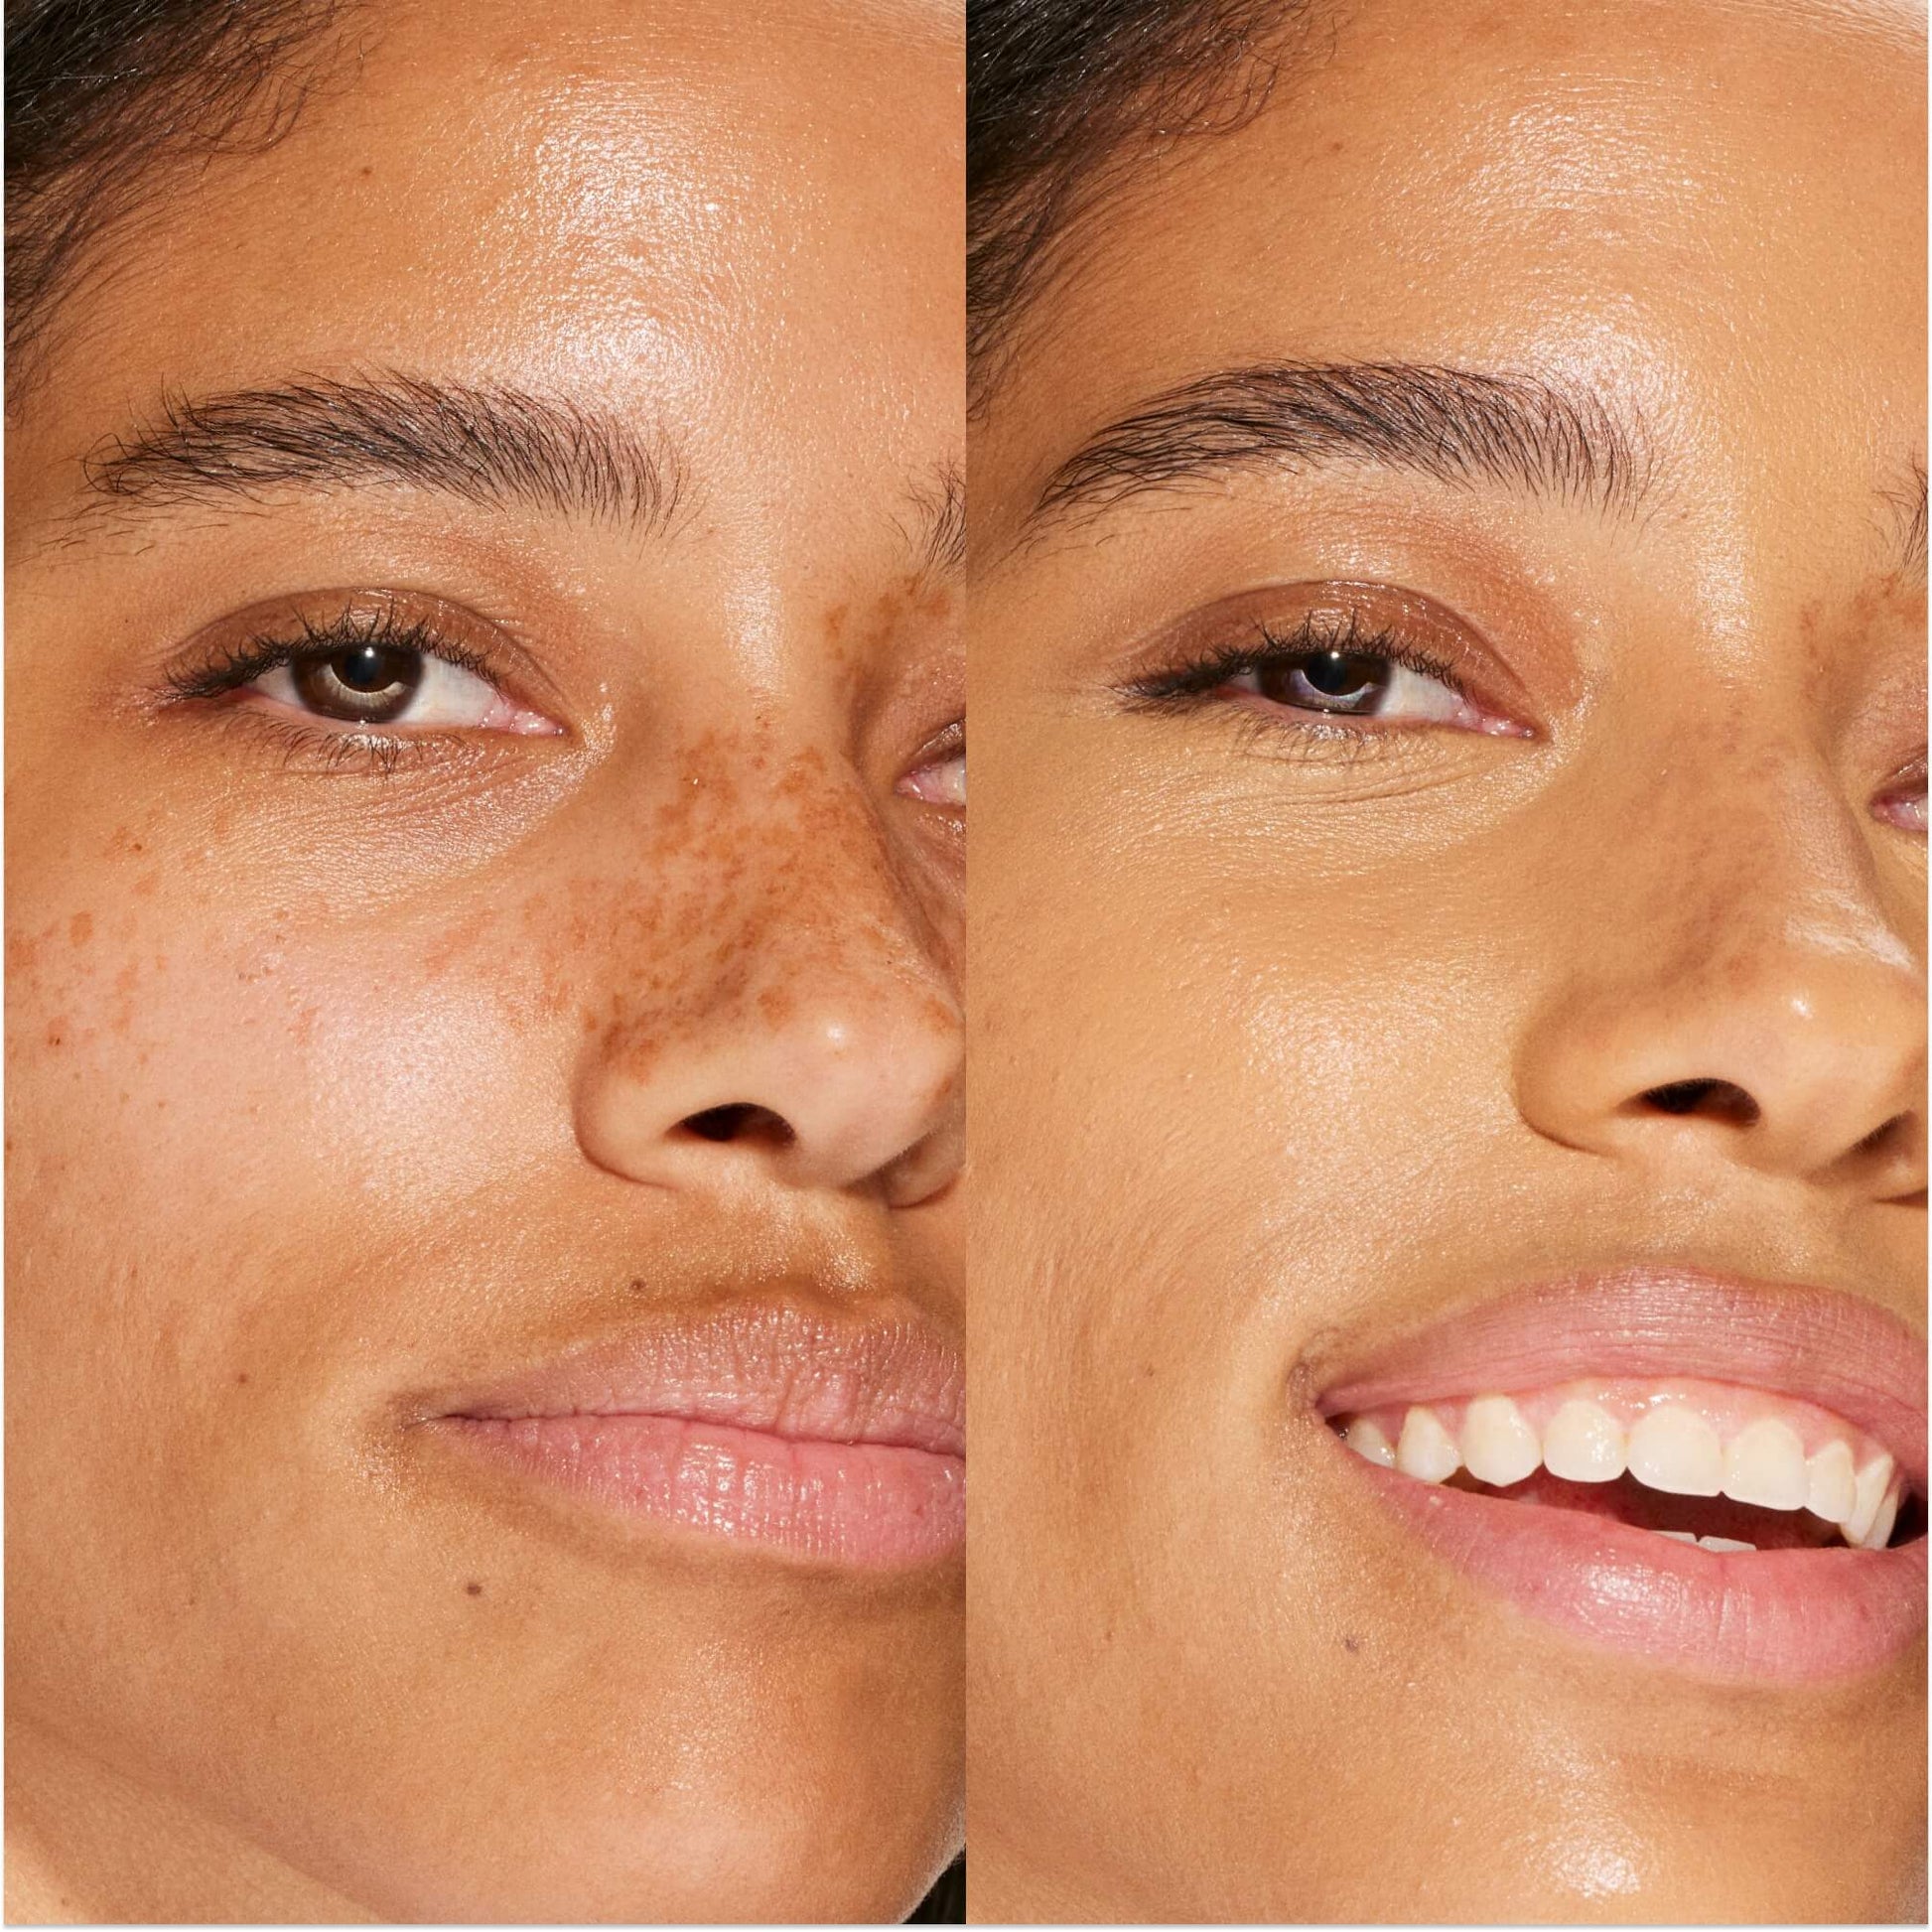 A person's face before and after using Tower 28 Beauty's Swipe Serum Concealer in shade 13.0 PLAYA to cover up dark circles, blemishes, and discoloration